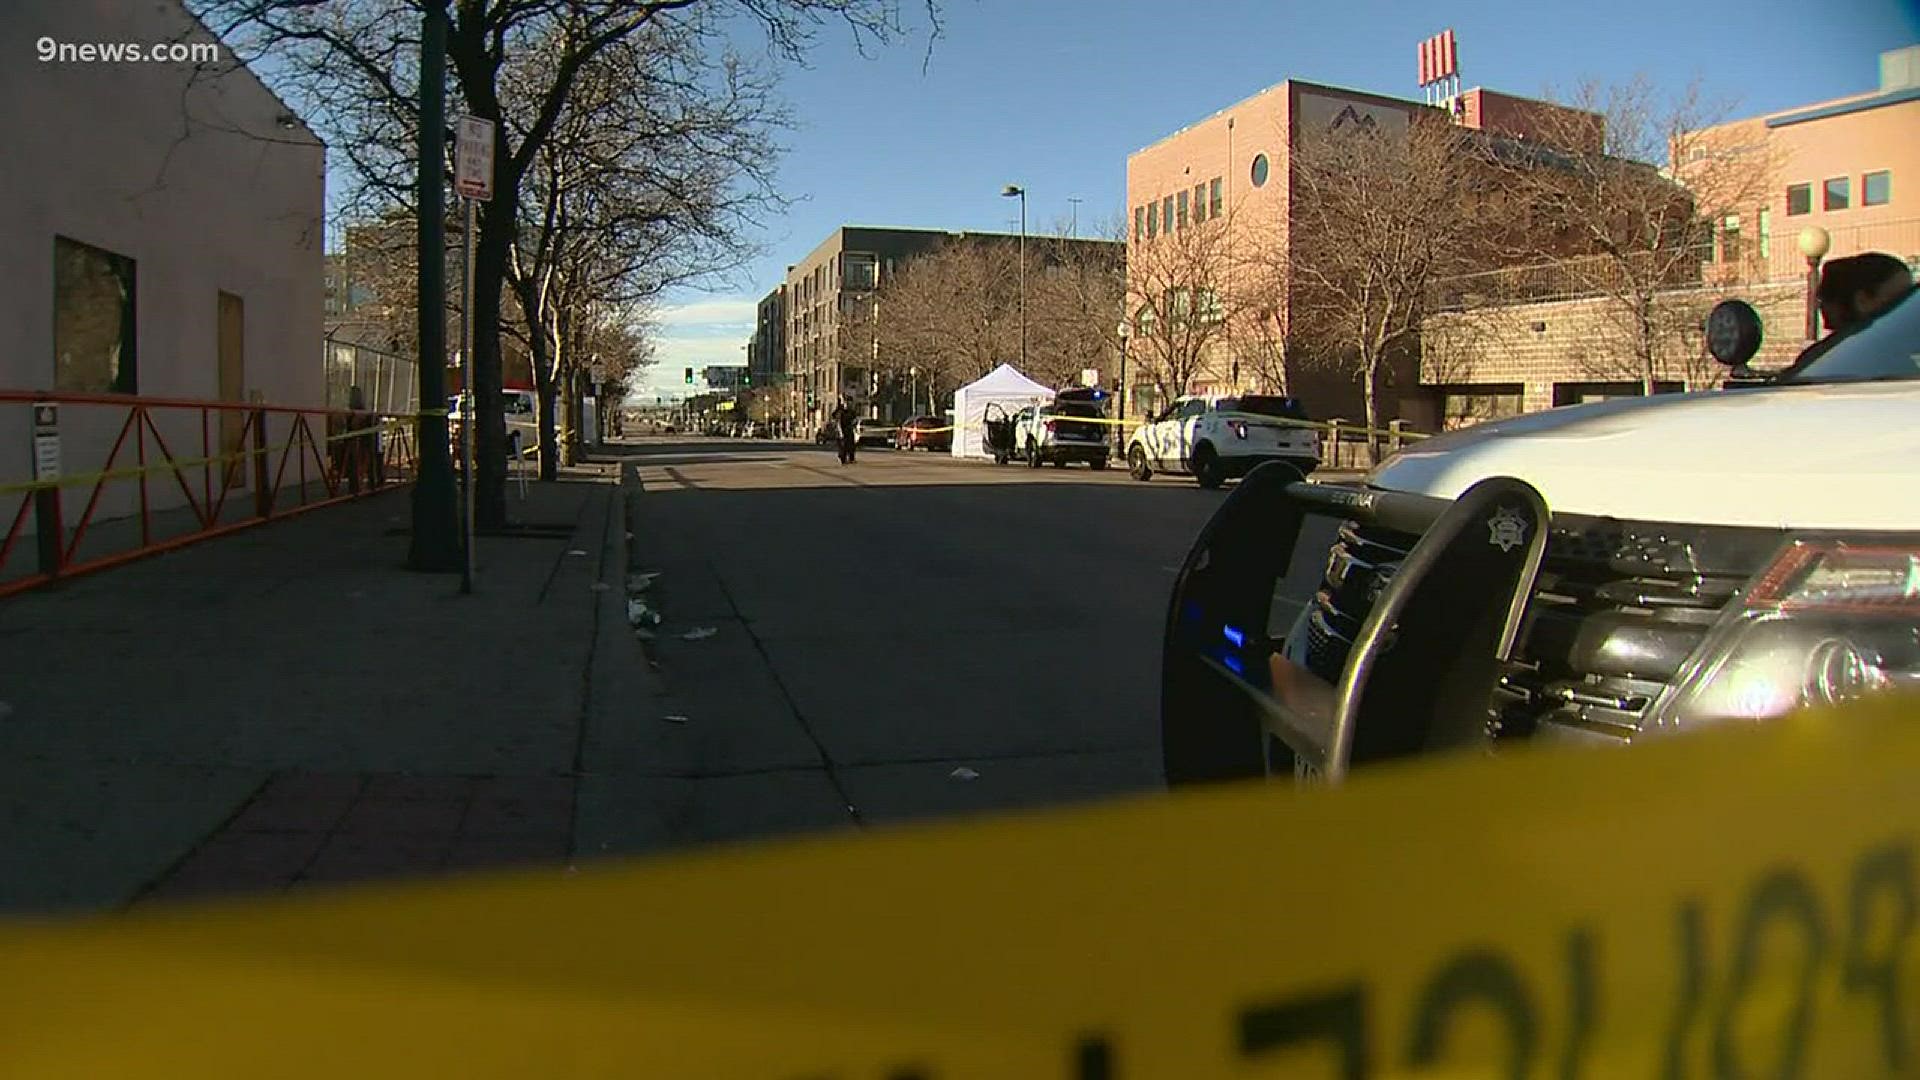 Denver police have arrested a suspect in the death of a man found near the homeless shelters in Five Points. Investigators haven't named the victim or say how he died.